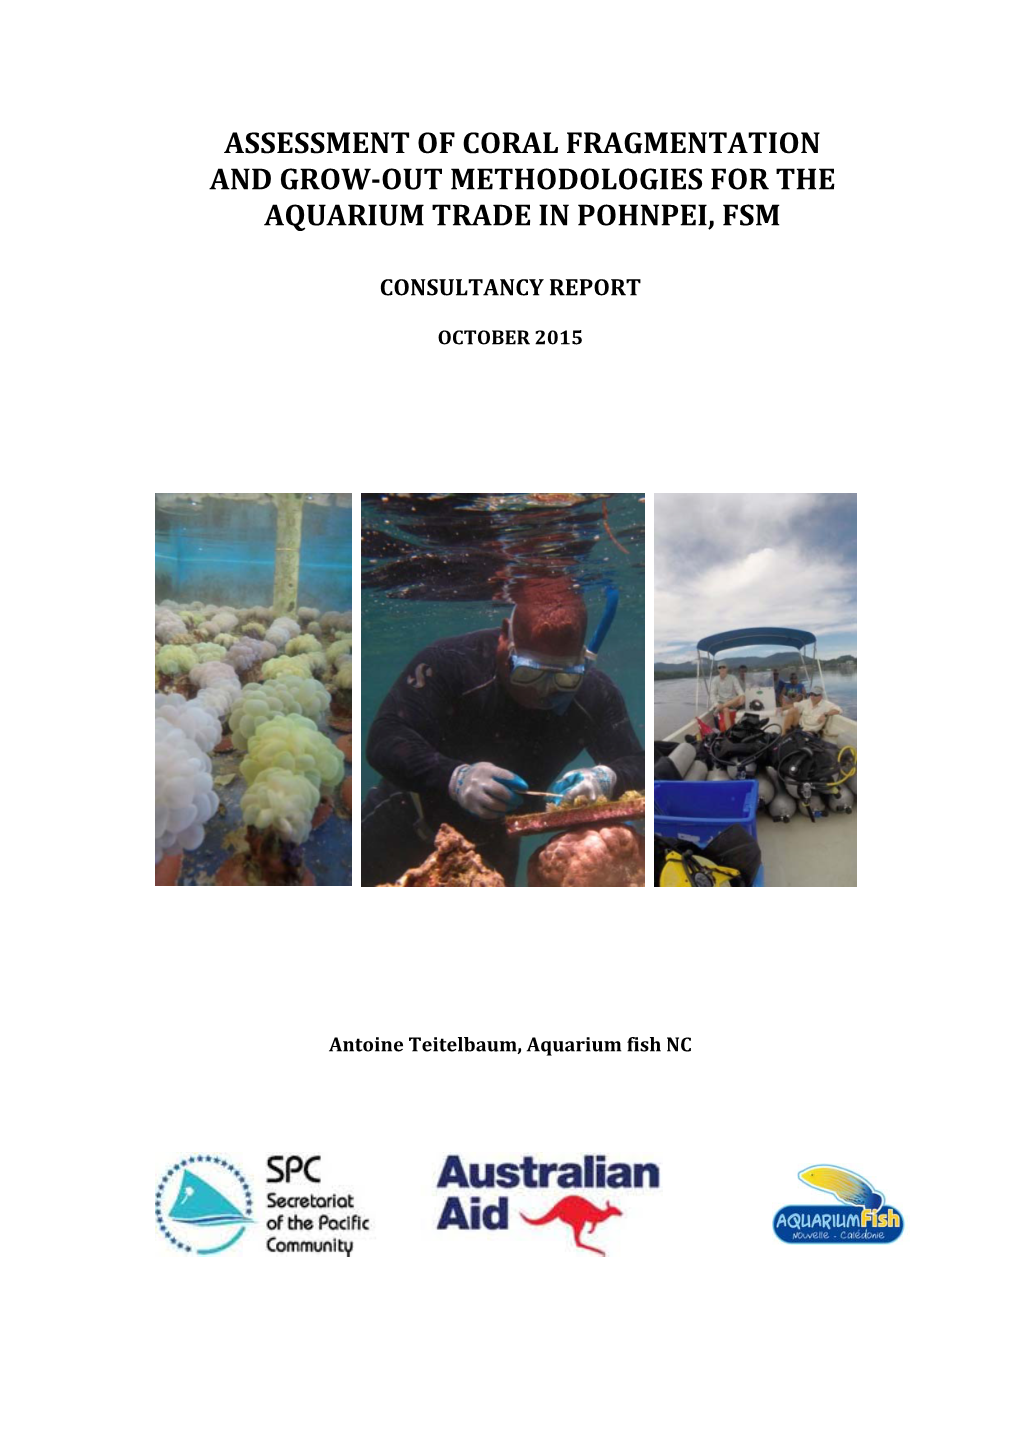 Assessment of Coral Fragmentation and Grow-Out Methodologies for The